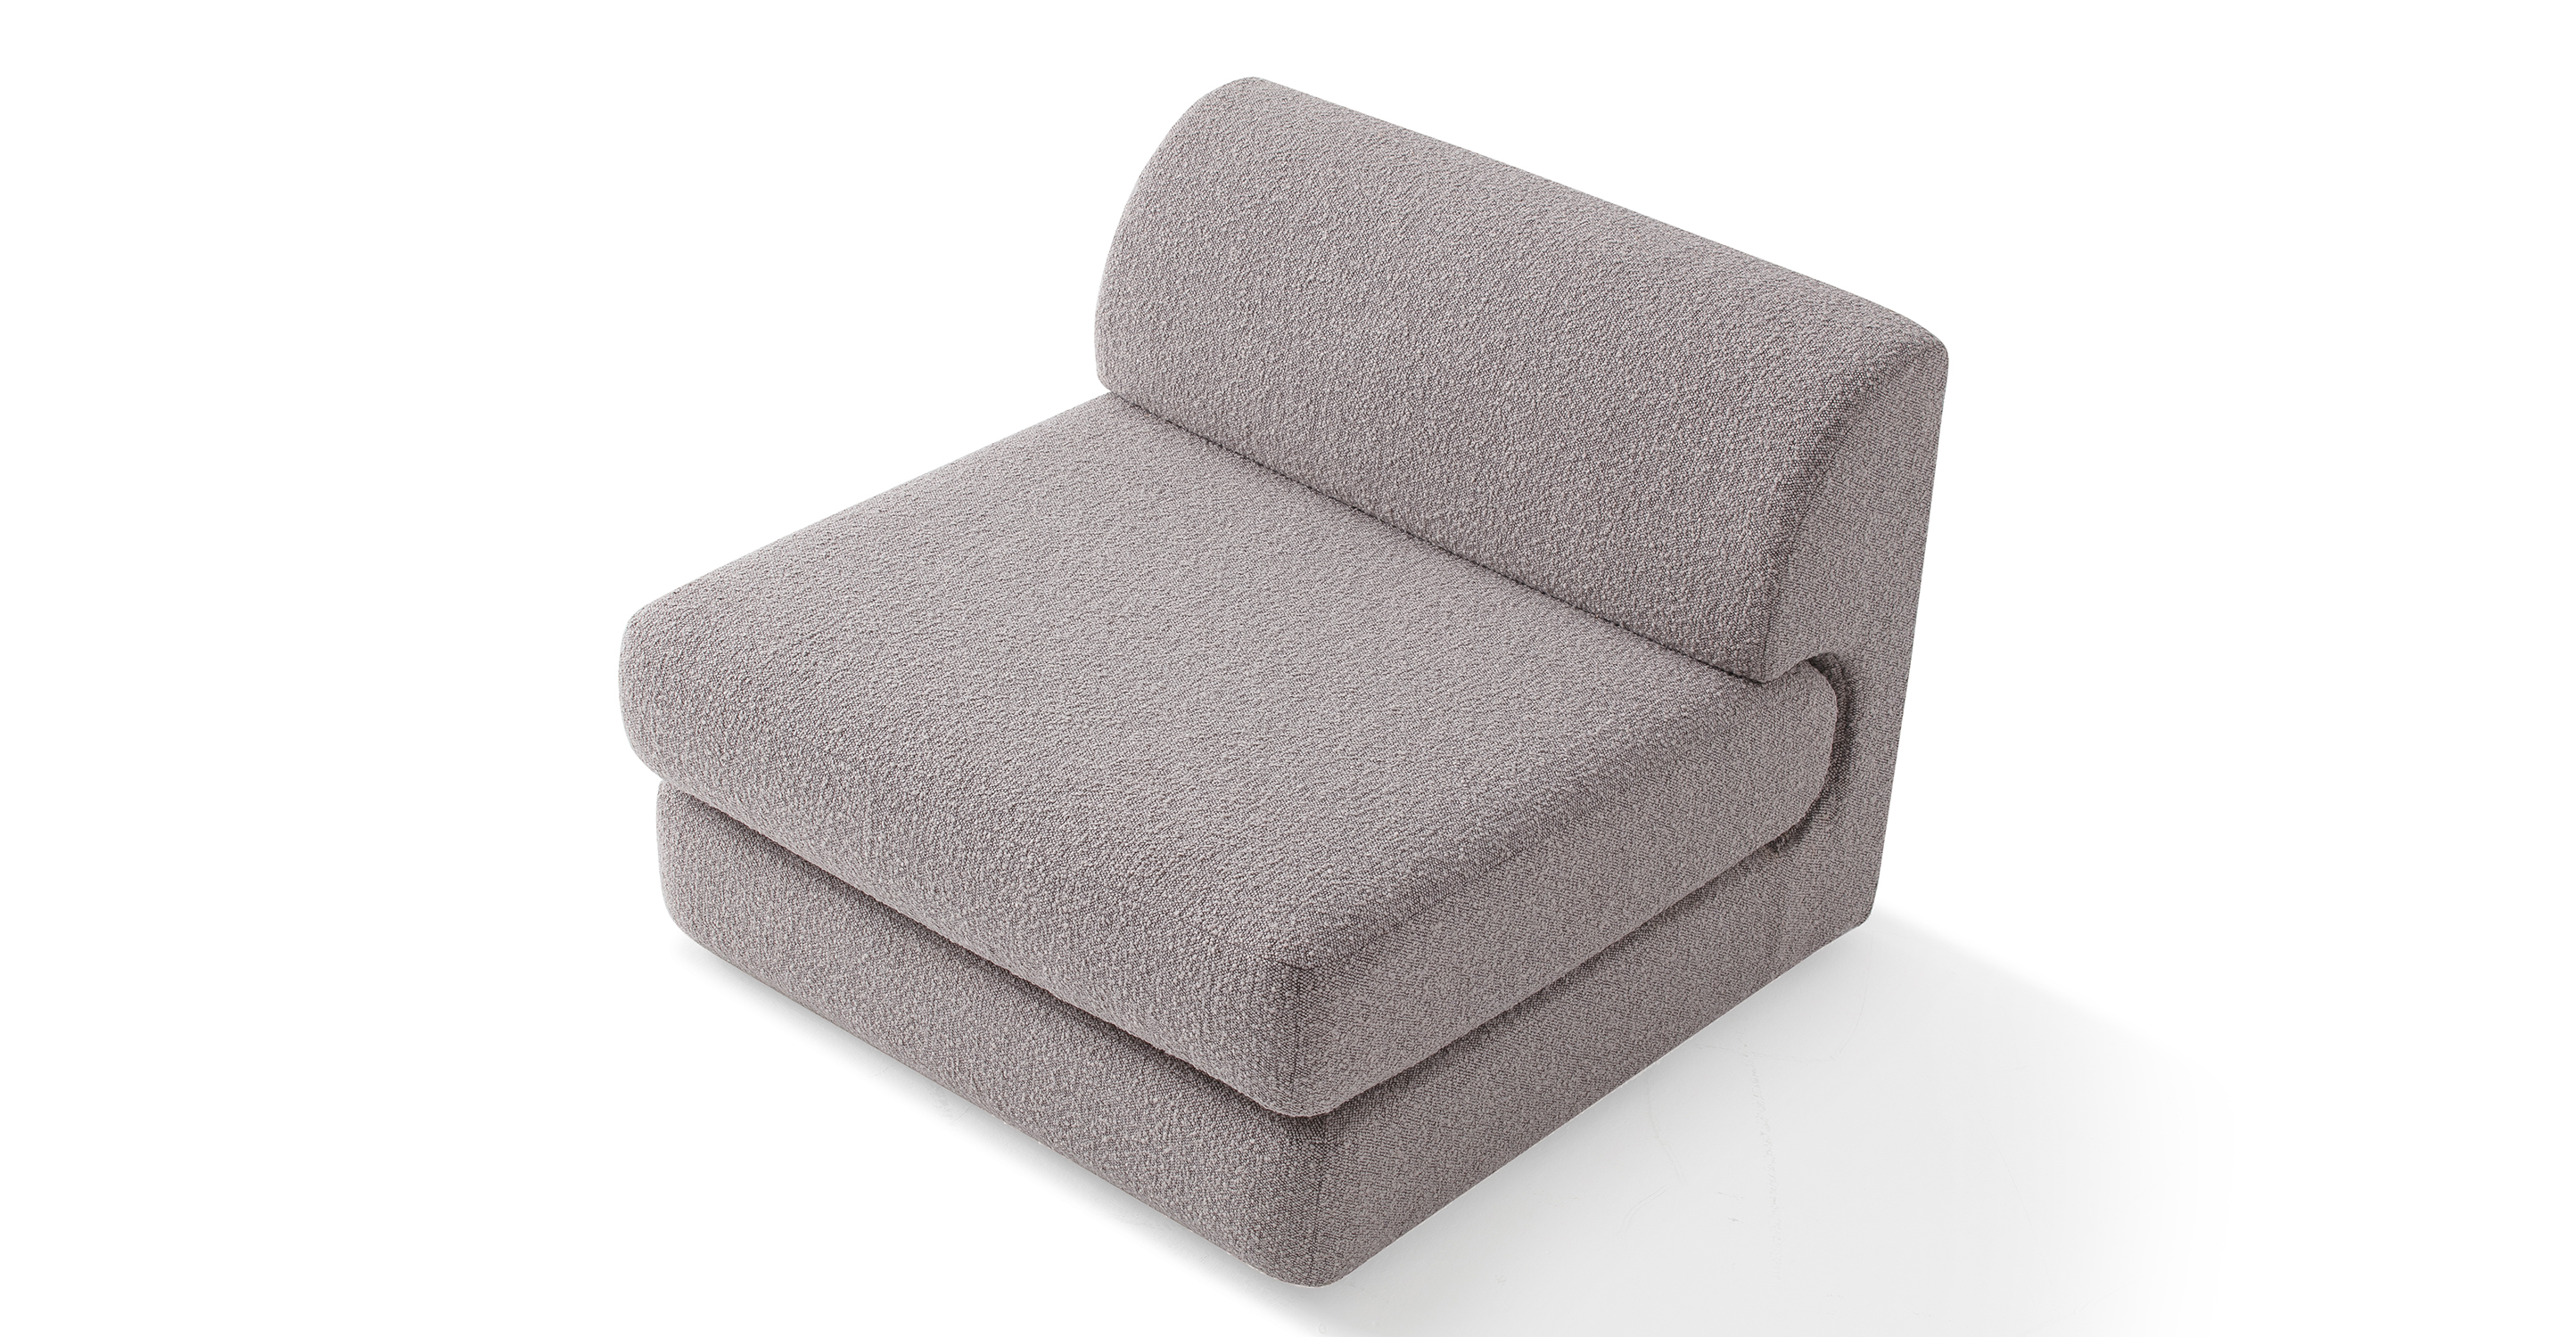 The Shelter series is a stunning and contemporary modular sofa with a sleek design, characterized by its low profile and elevated stance on slender black squared legs.
The Shelter seat cushion is curved at the back and fits into the chair back like a puzzle piece. Imaged is the armless Shelter chair in Bocce.